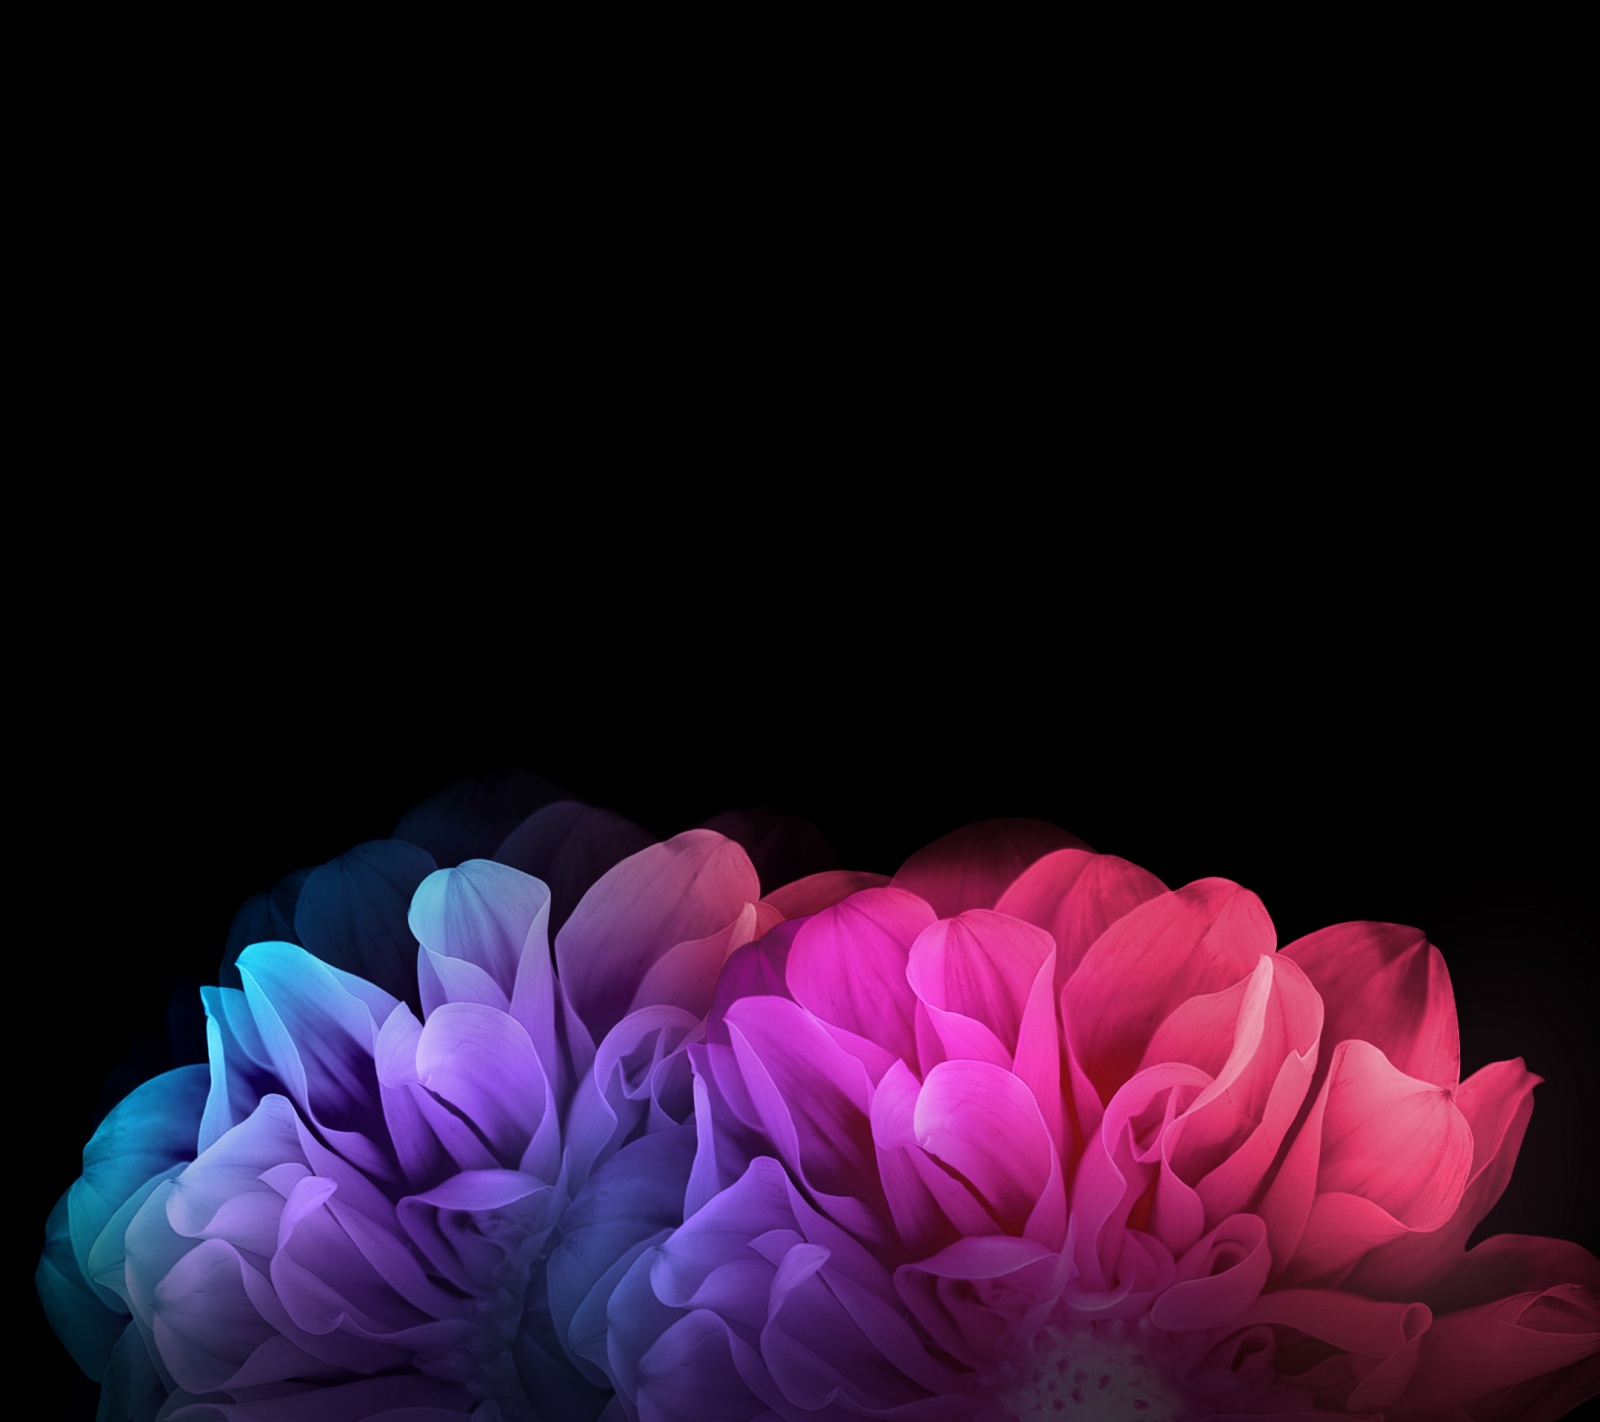 Cult of Android - Download LG's gorgeous new wallpapers from the G ...